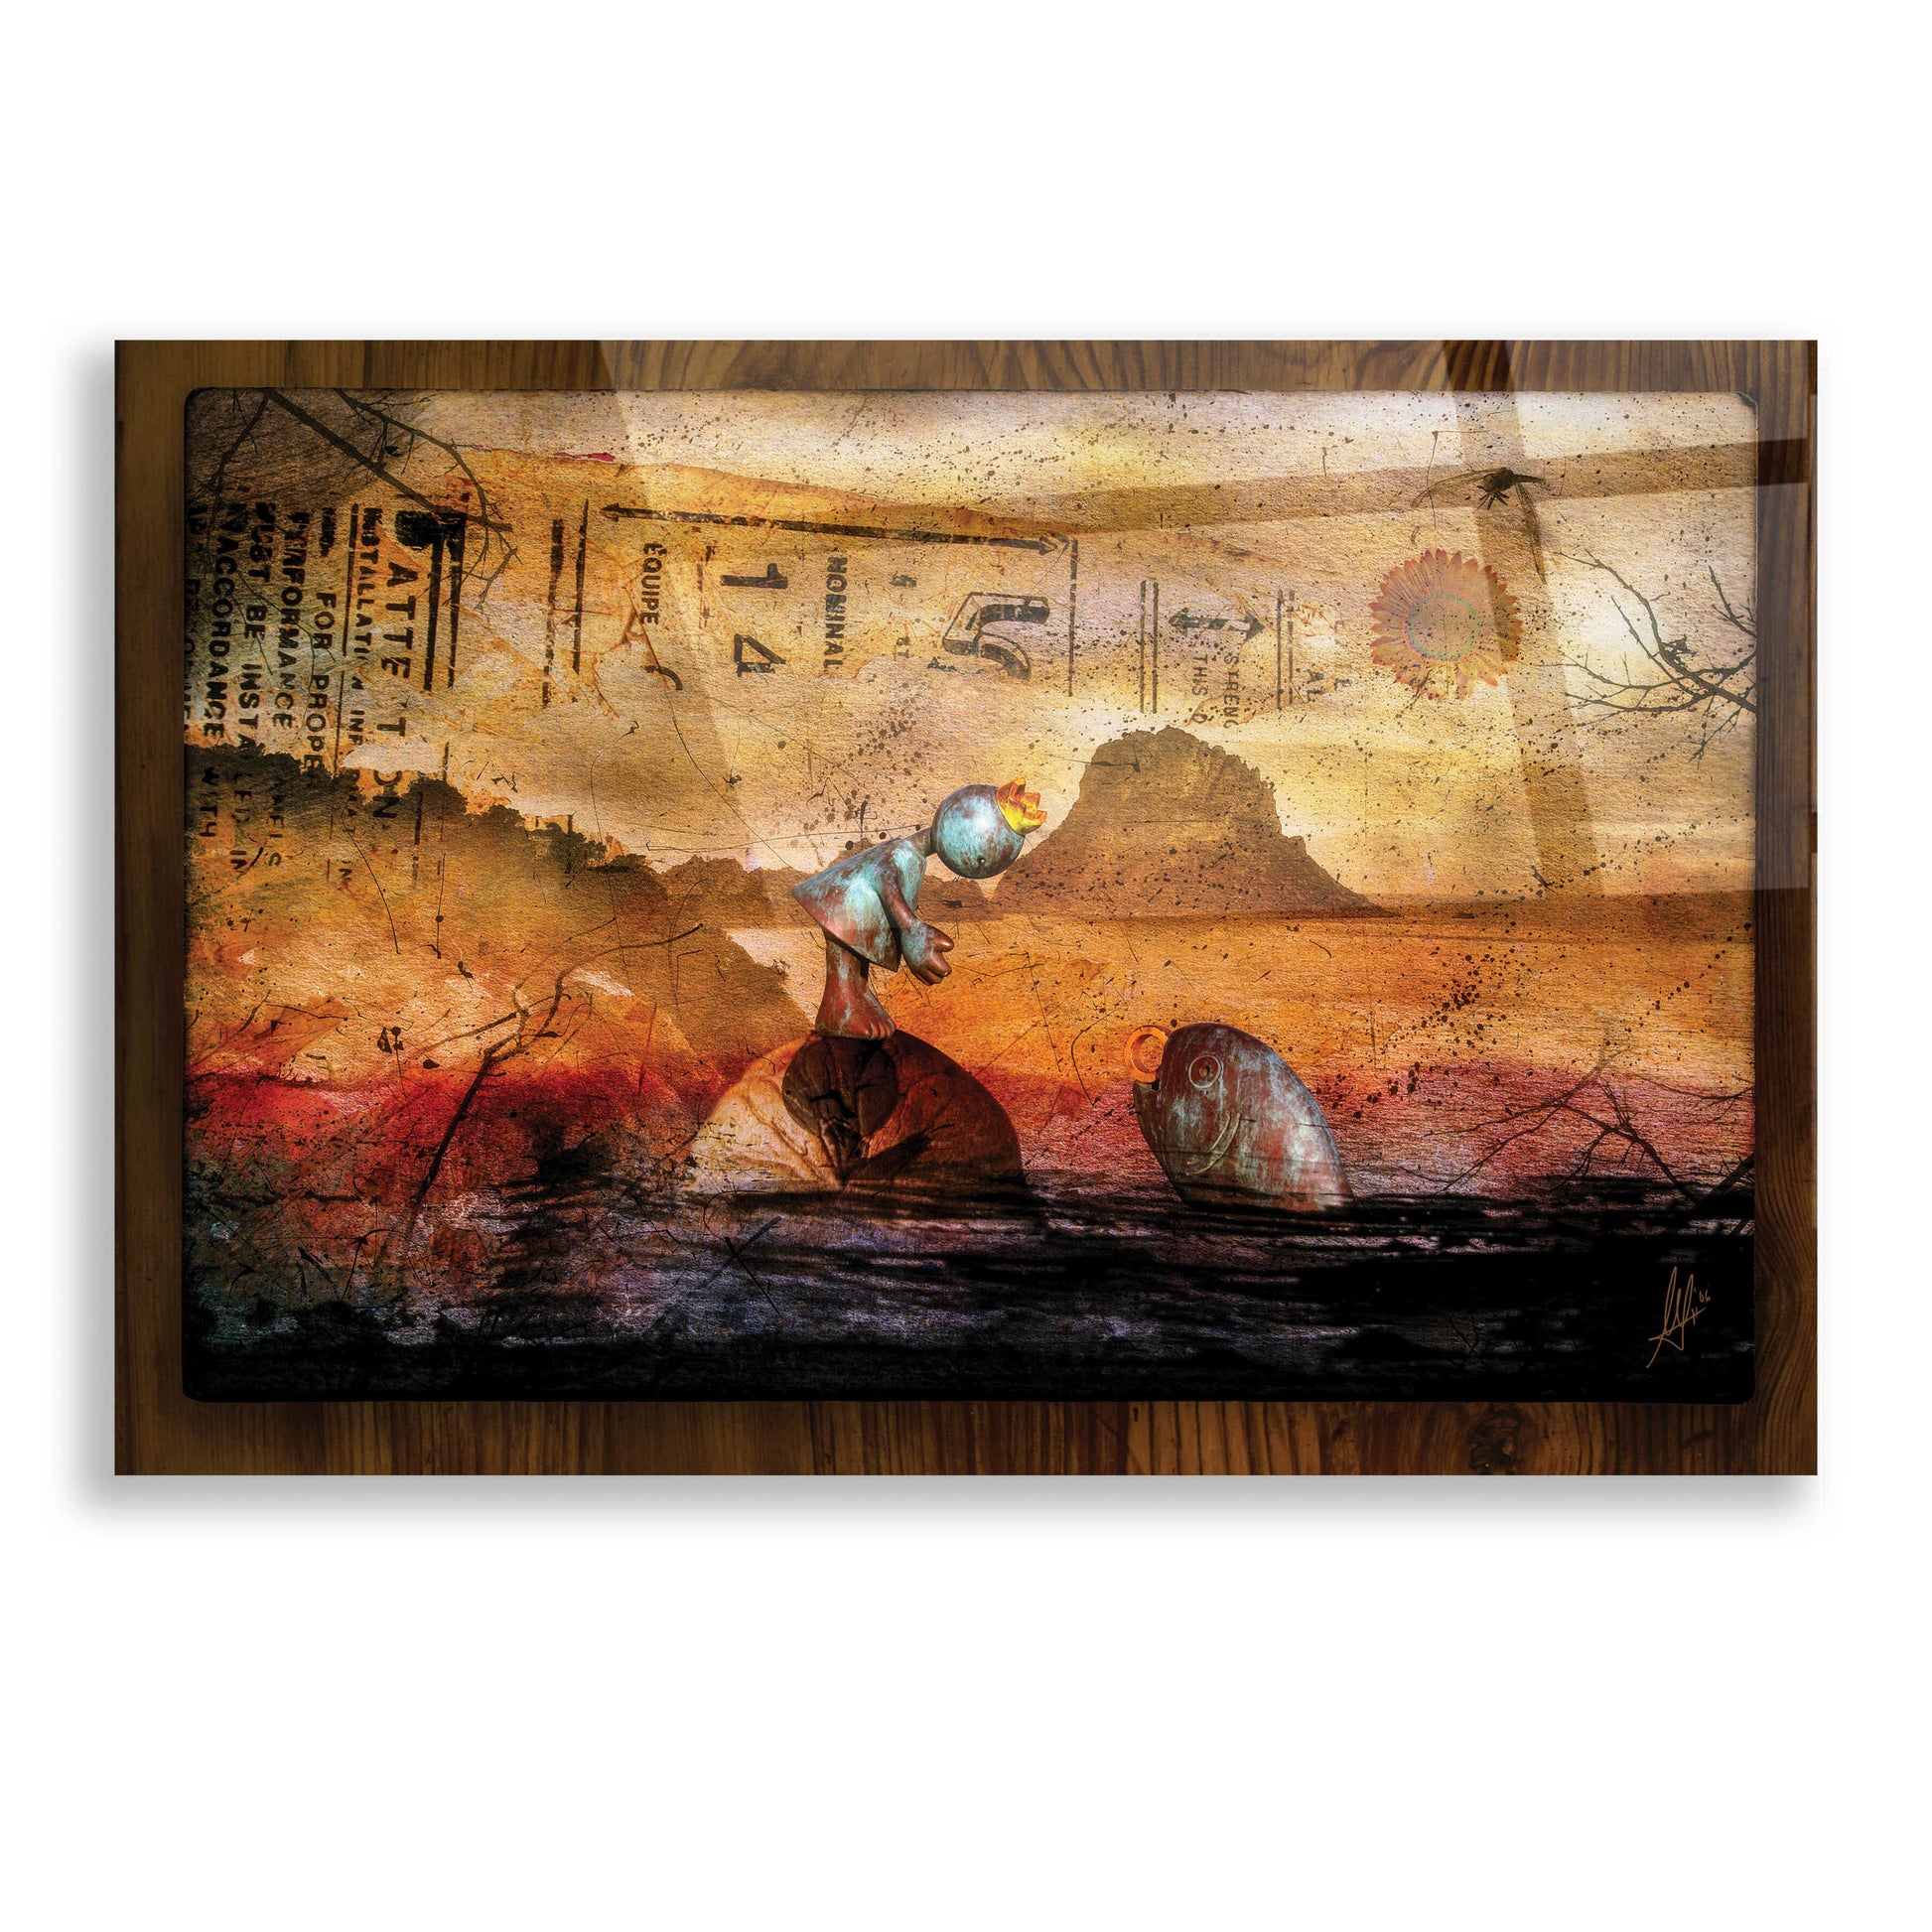 Epic Art 'Once Upon A Time' by Mario Sanchez Nevado, Acrylic Glass Wall Art